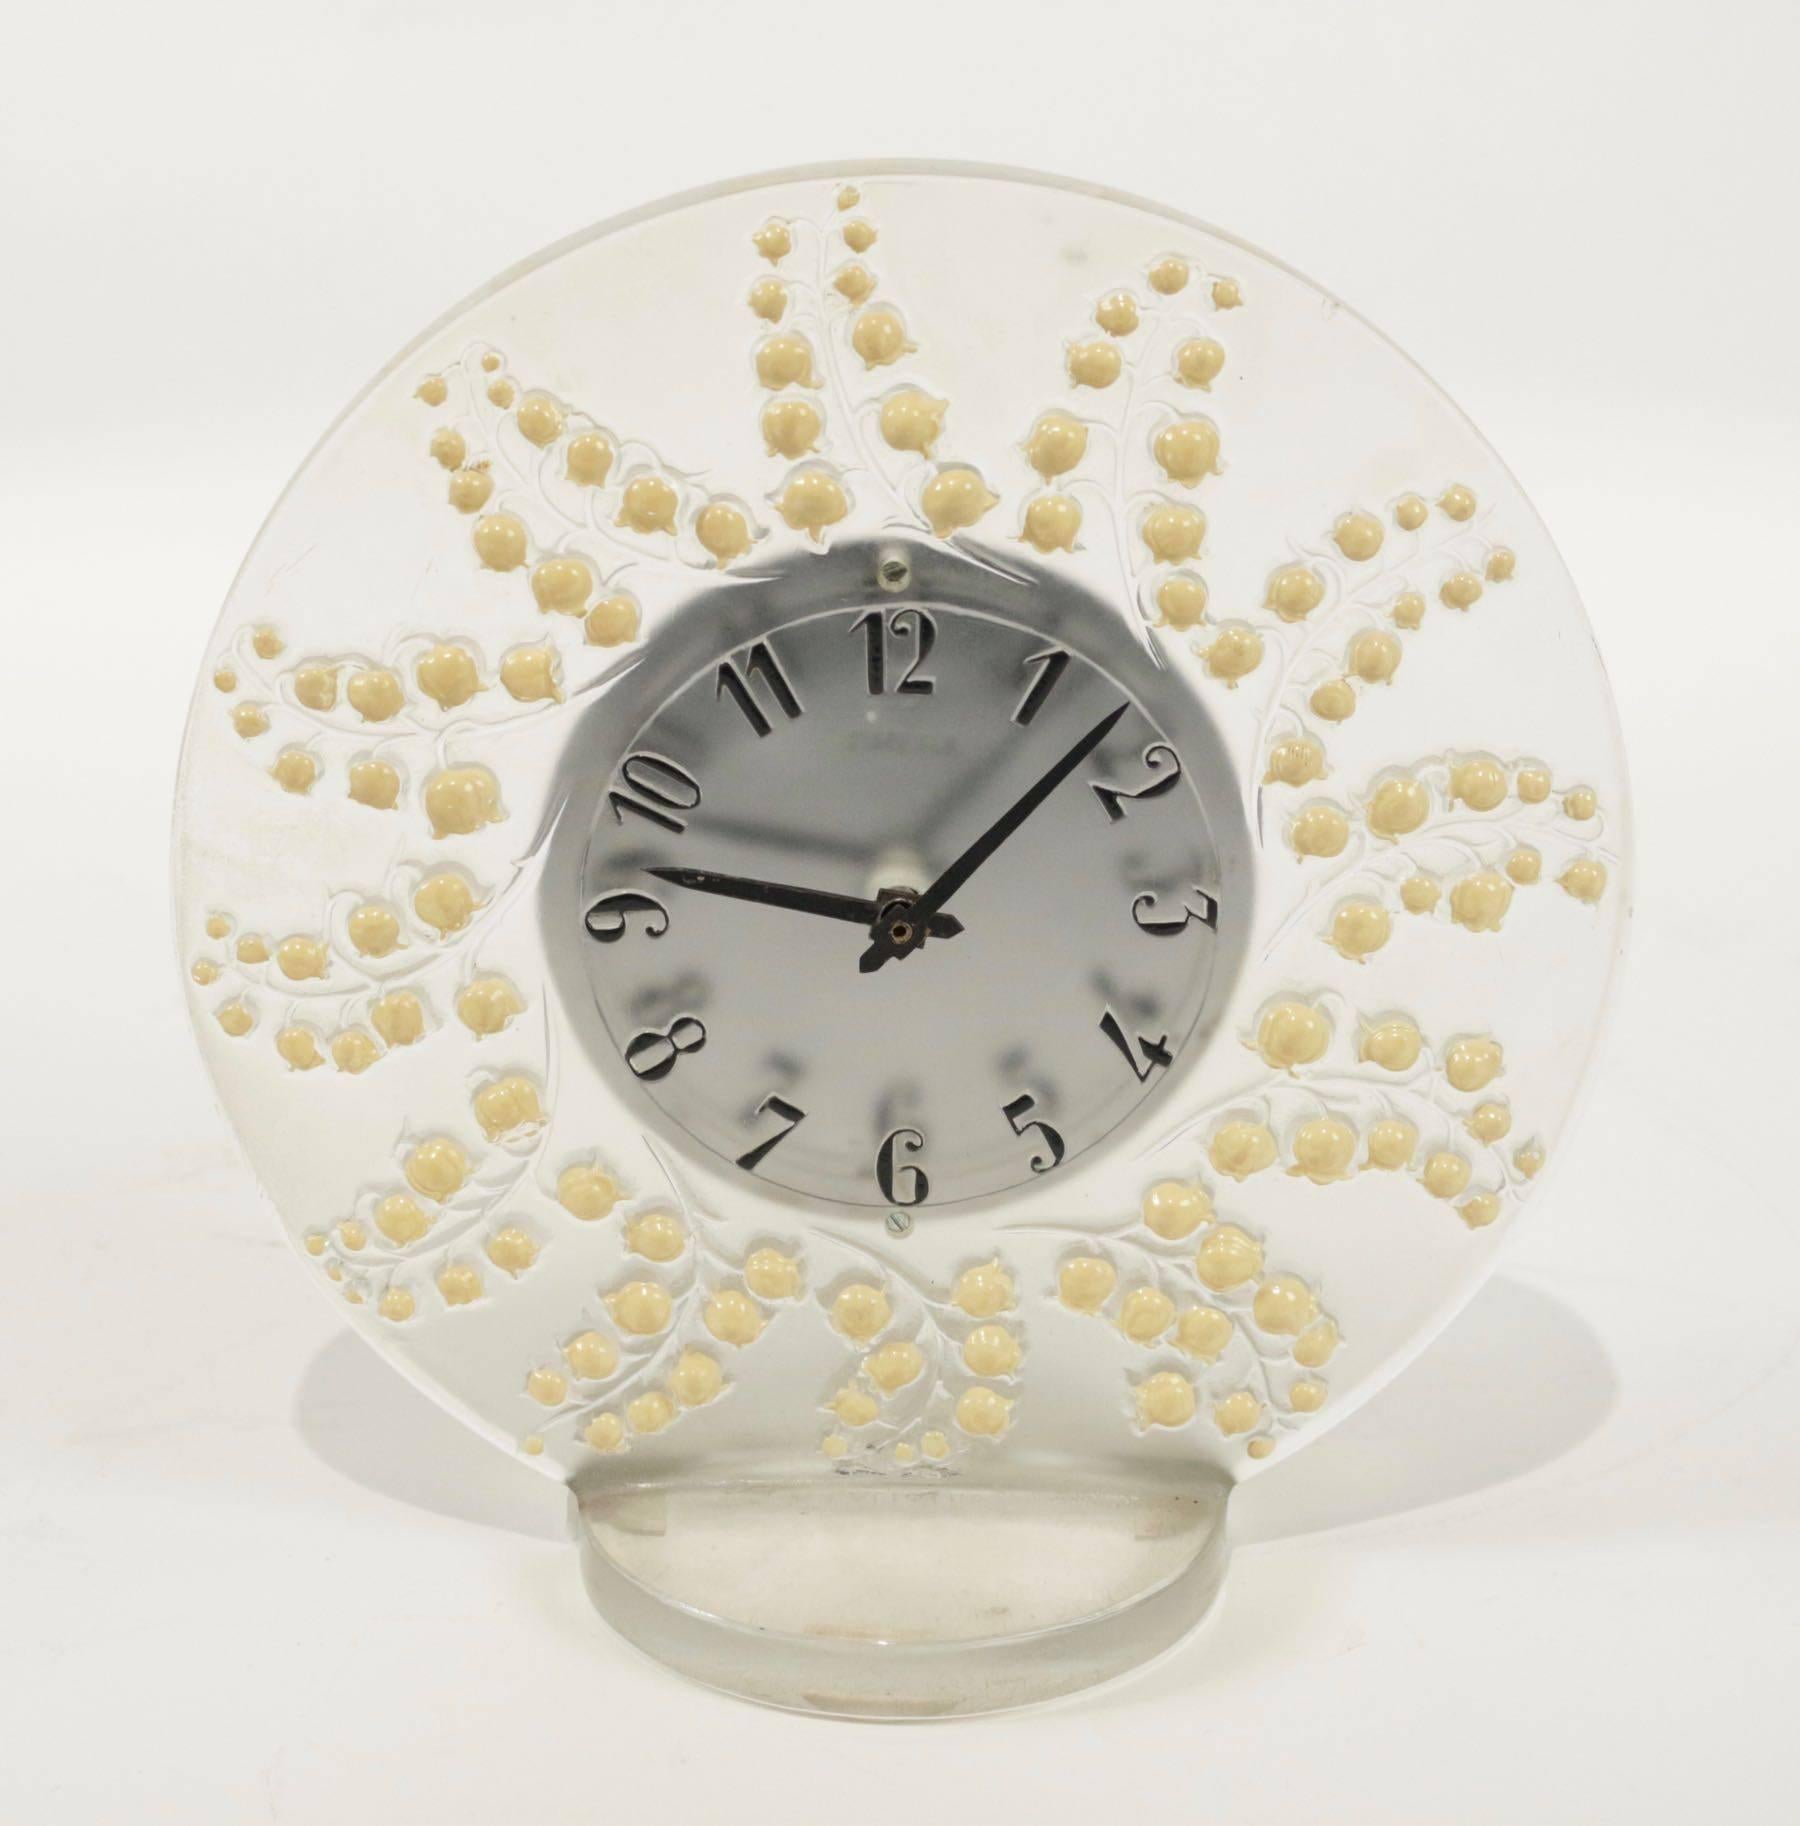 Rene Lalique clock Muguet: 
21 centimeters tall round clear mistletoe decorated glass around a central mechanism on an opposing round base
 design of lily of the valley white enemailed emanating from the center facewhite.
Mecanism Quartz working